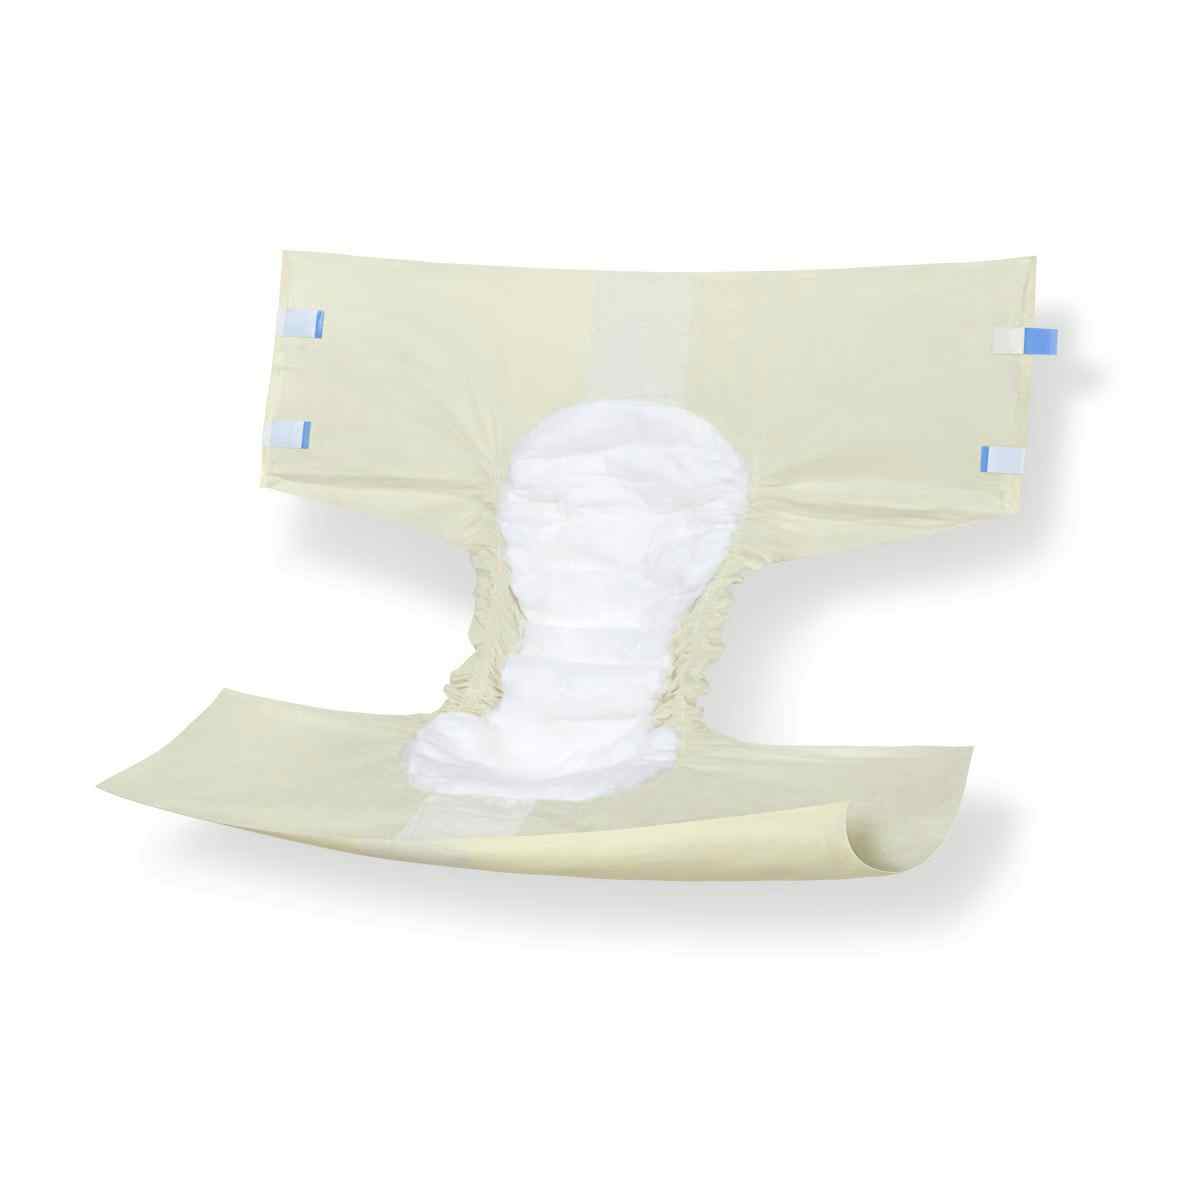 Medline Protection Plus Contoured Adult Briefs, Heavy Absorbency, MTB30600, XL (59"-66") - Case of 60